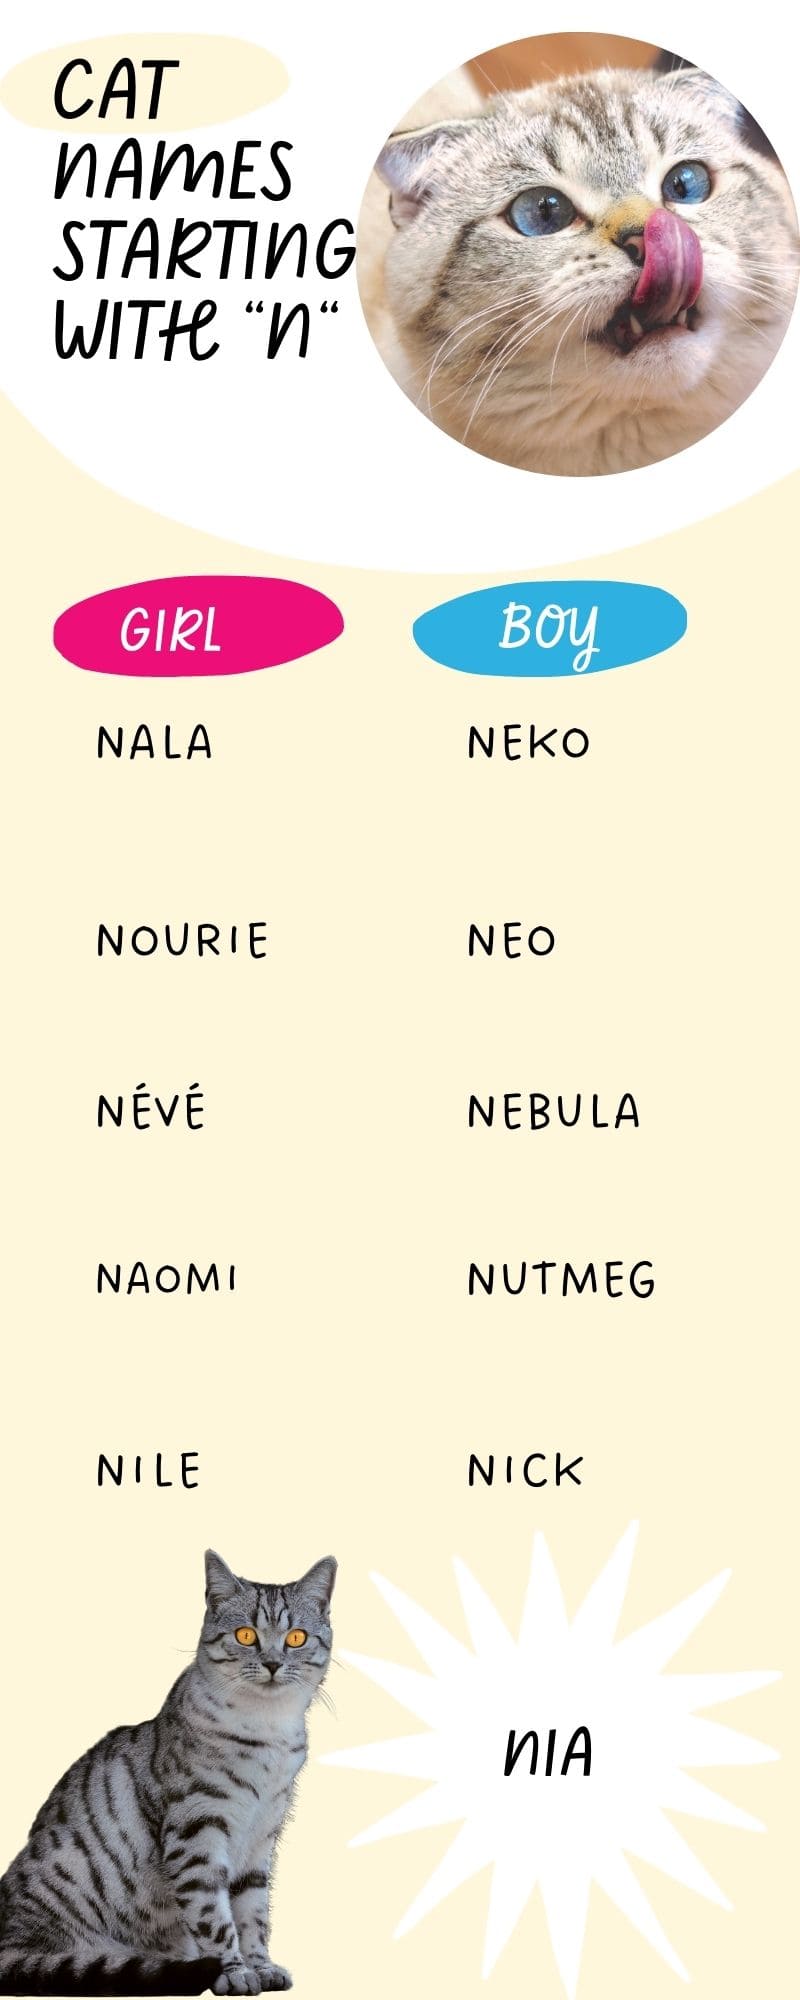 This infographic shows 11 Cat Names Starting with 'N'